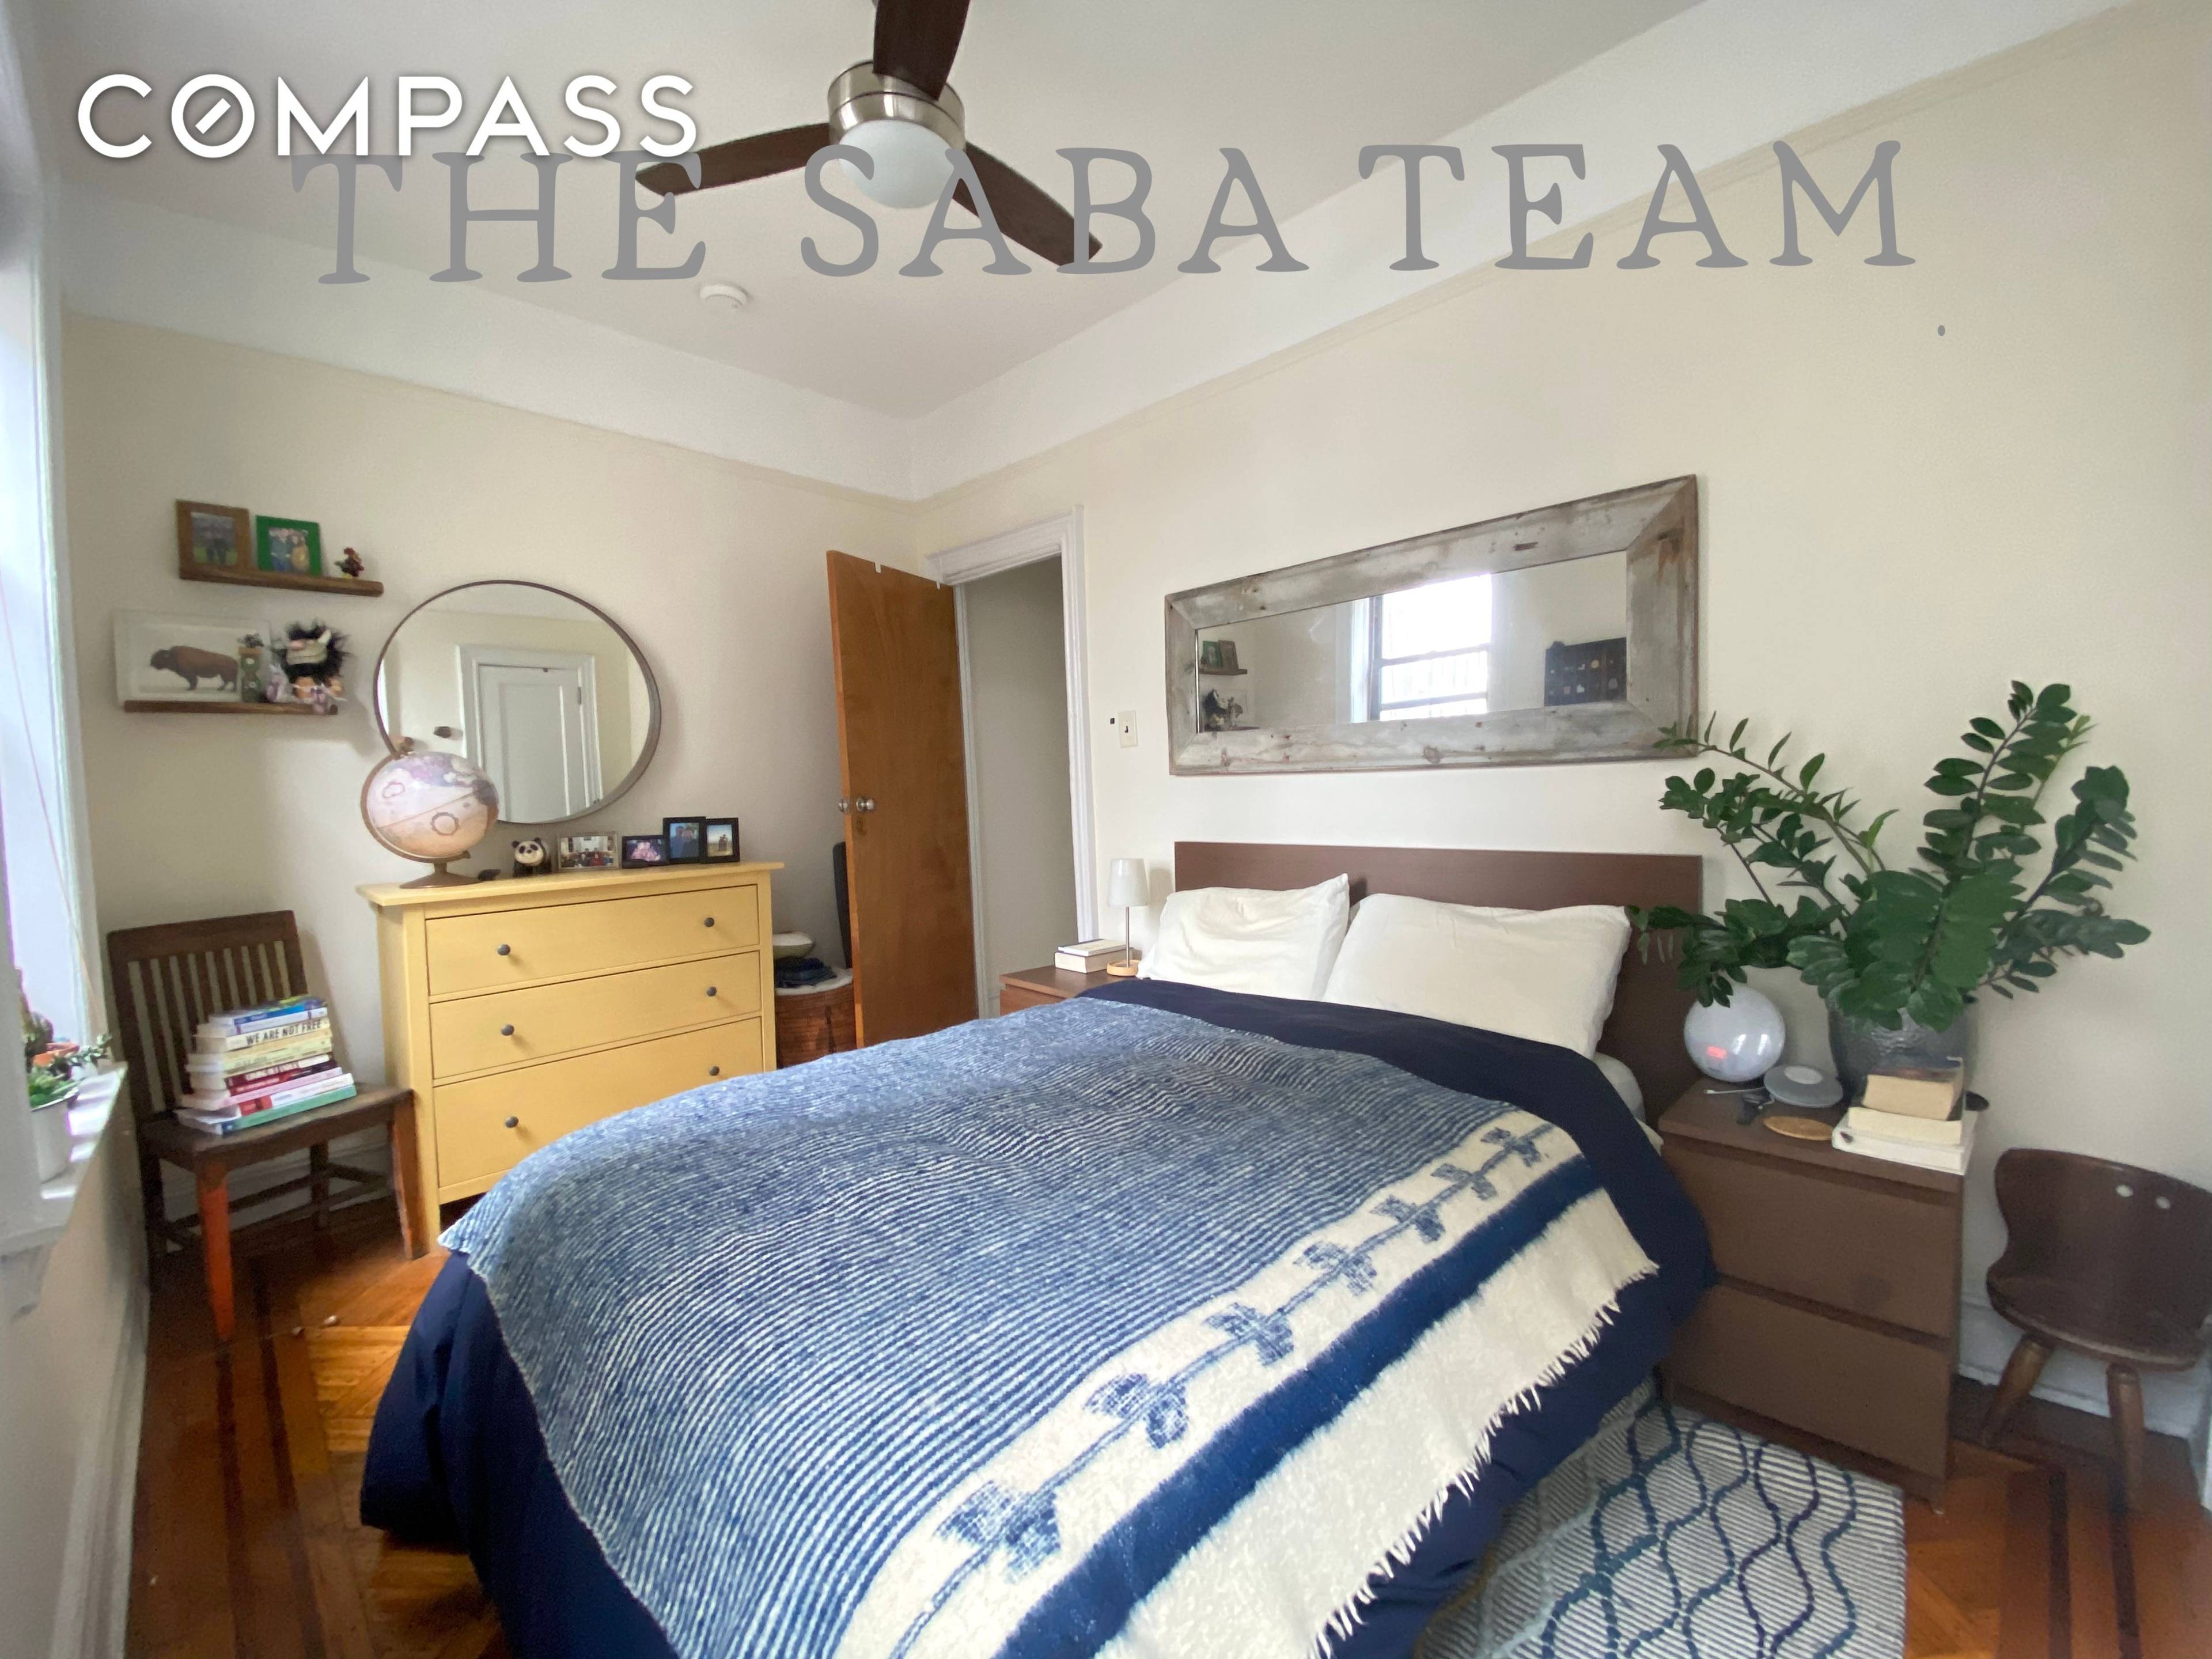 Welcome to 191 A Court St 2, a charming top floor apartment in mixed use property located in the vibrant neighborhood of Cobble Hill.